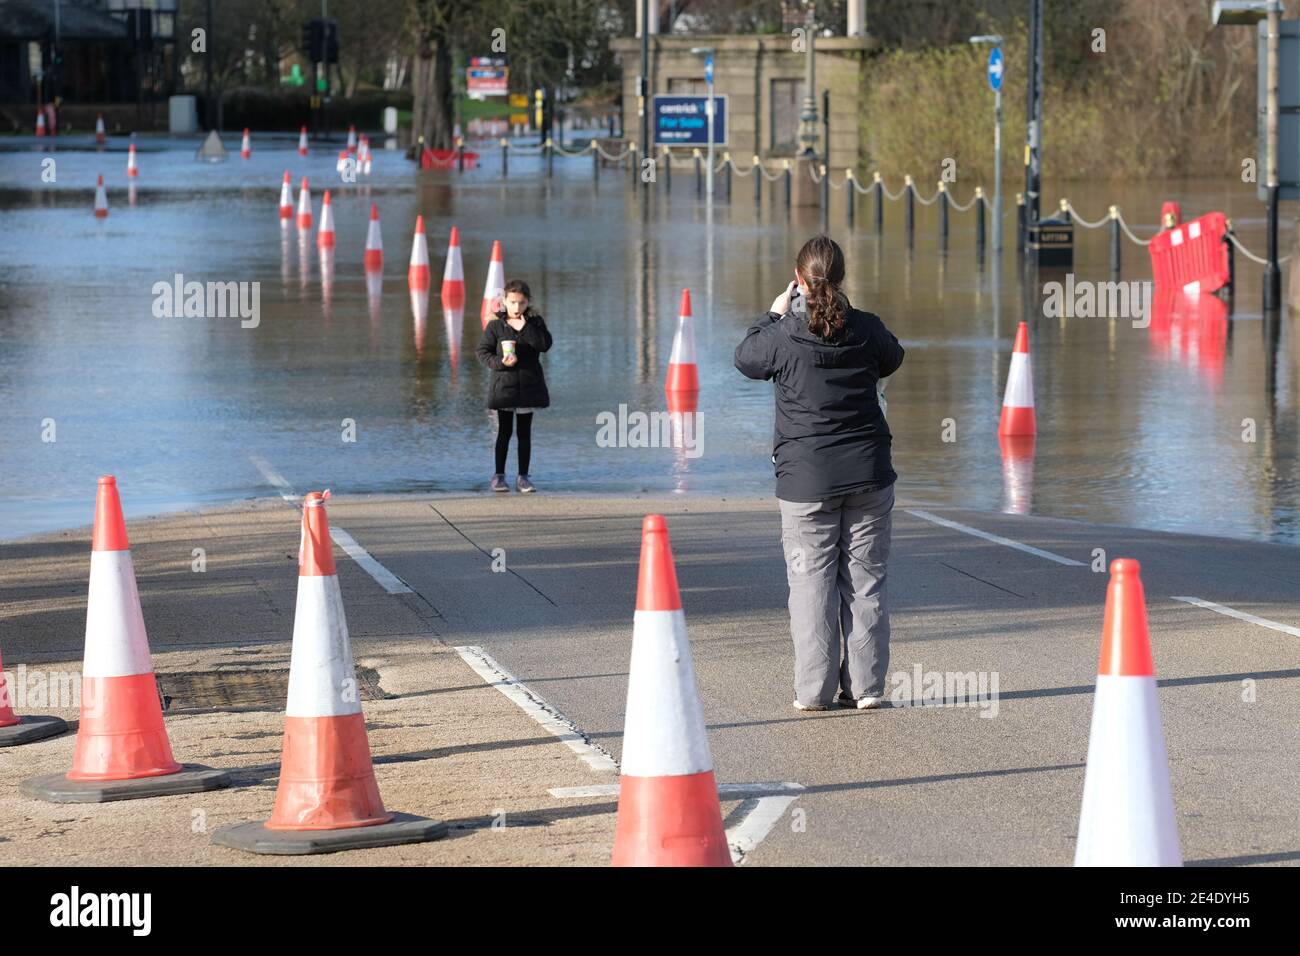 Worcester, Worcestershire, UK - Saturday 23rd January 2021 - Visitors come to see the floods as riverside roads and some businesses are flooded in the centre of Worcester after the River Severn overflowed. The Severn is expected to peak in Worcester later this evening.  Photo Steven May / Alamy Live News Stock Photo